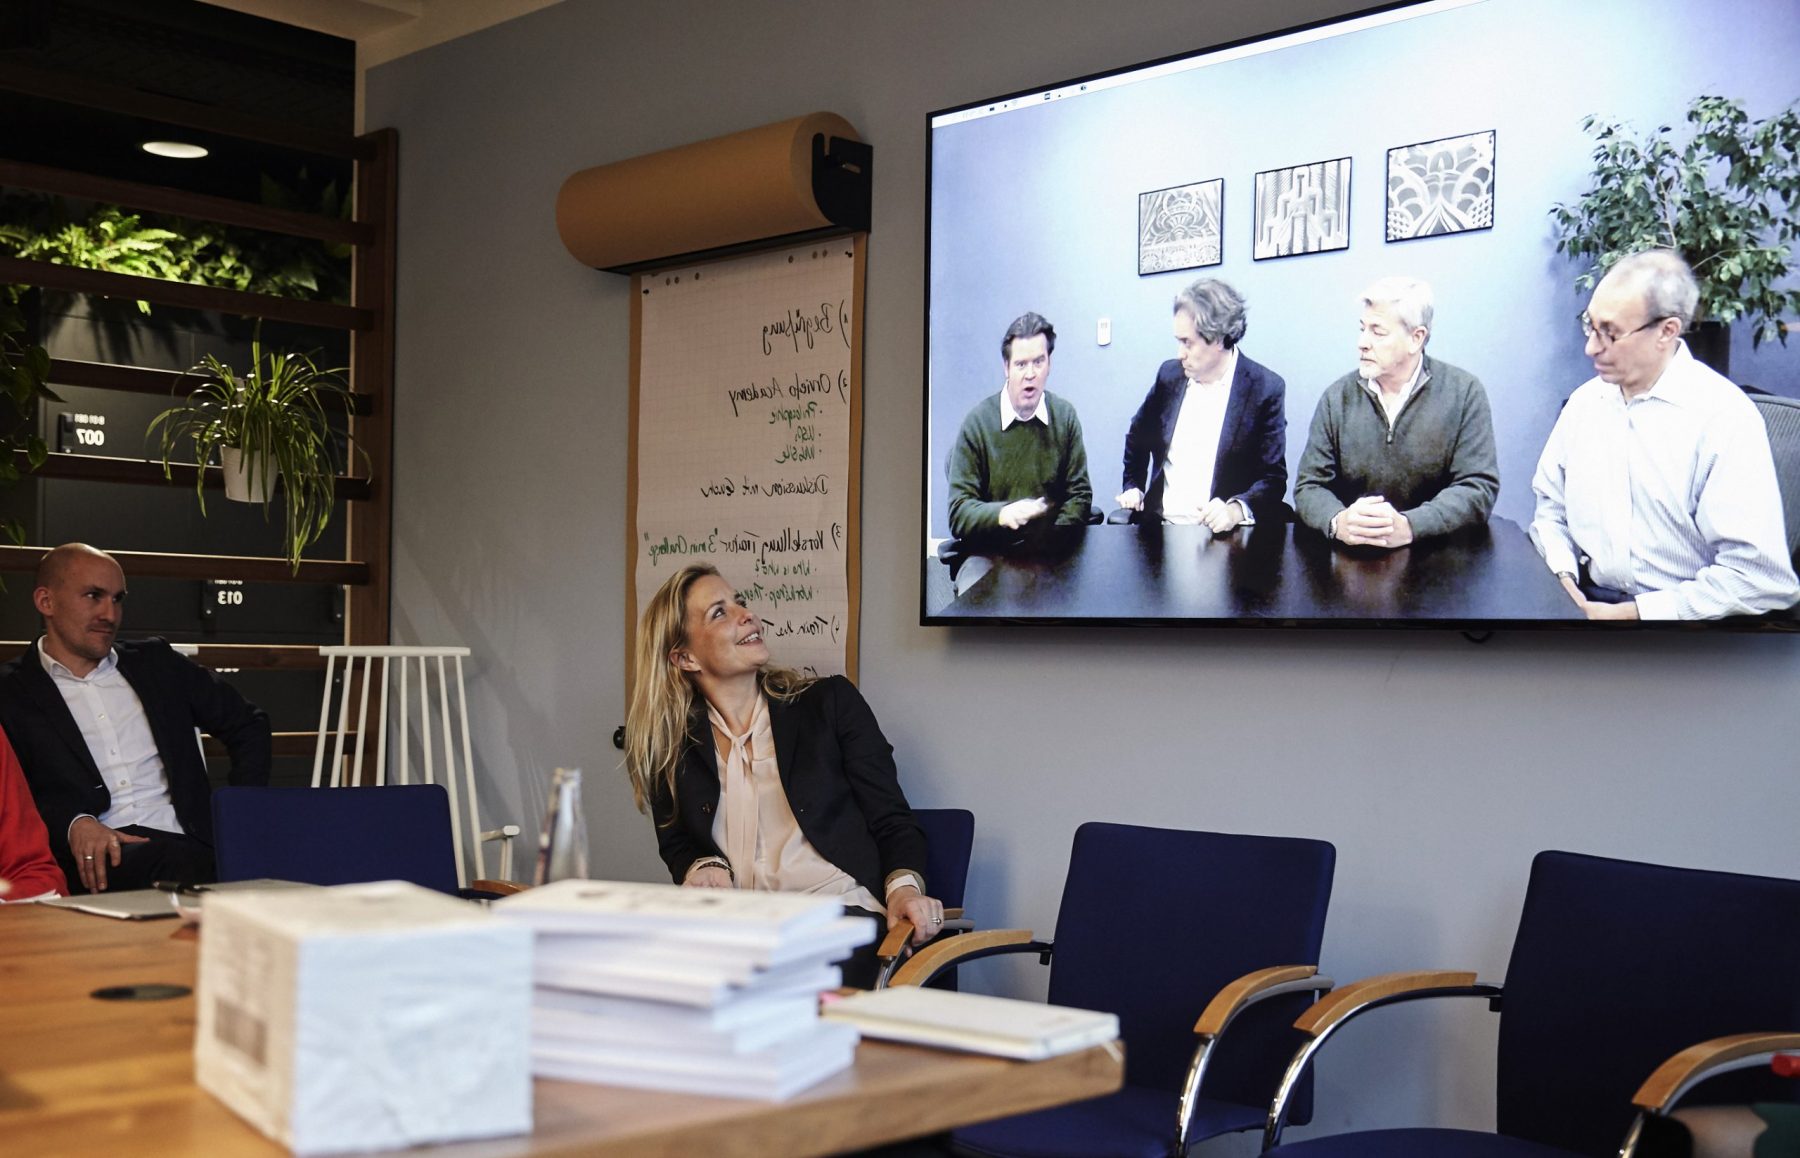 ORVIETO ACADEMY Header Visual: New Work; conference call meeting